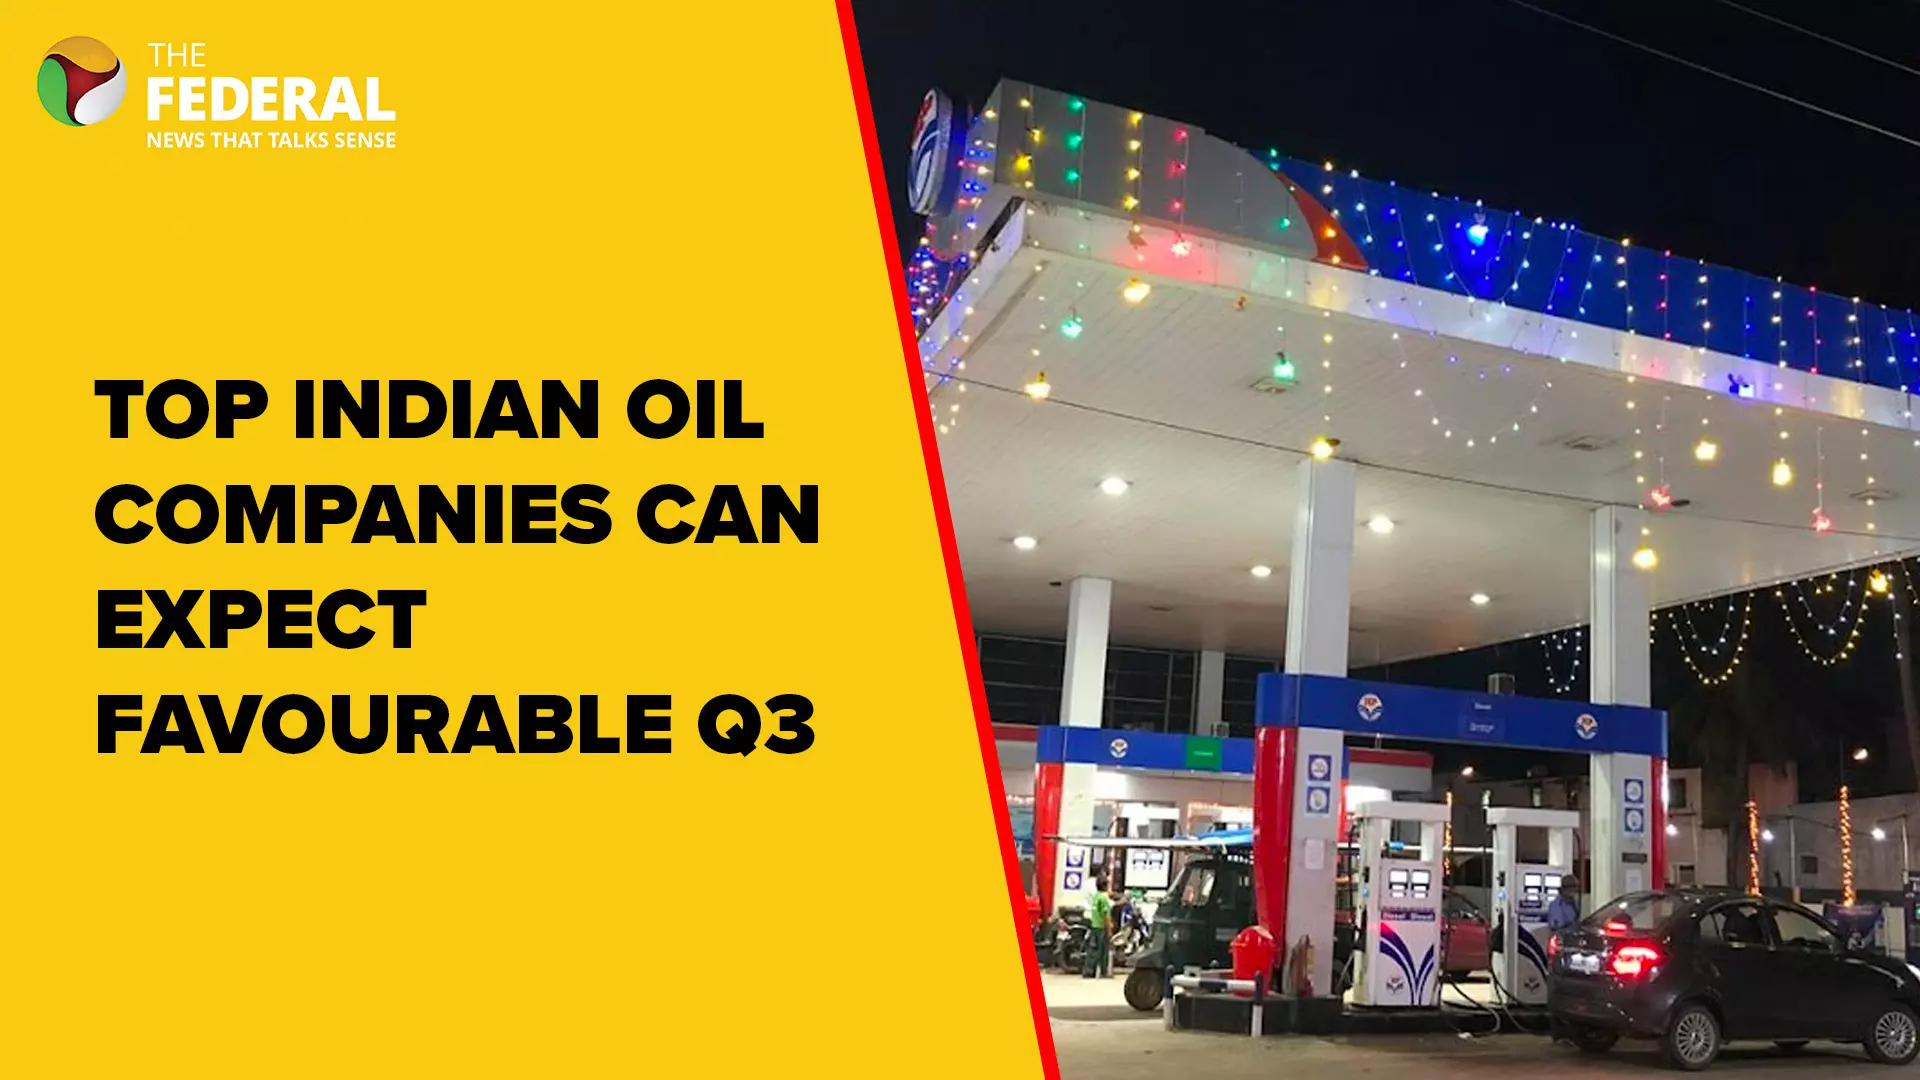 Top Indian oil companies can expect favourable Q3